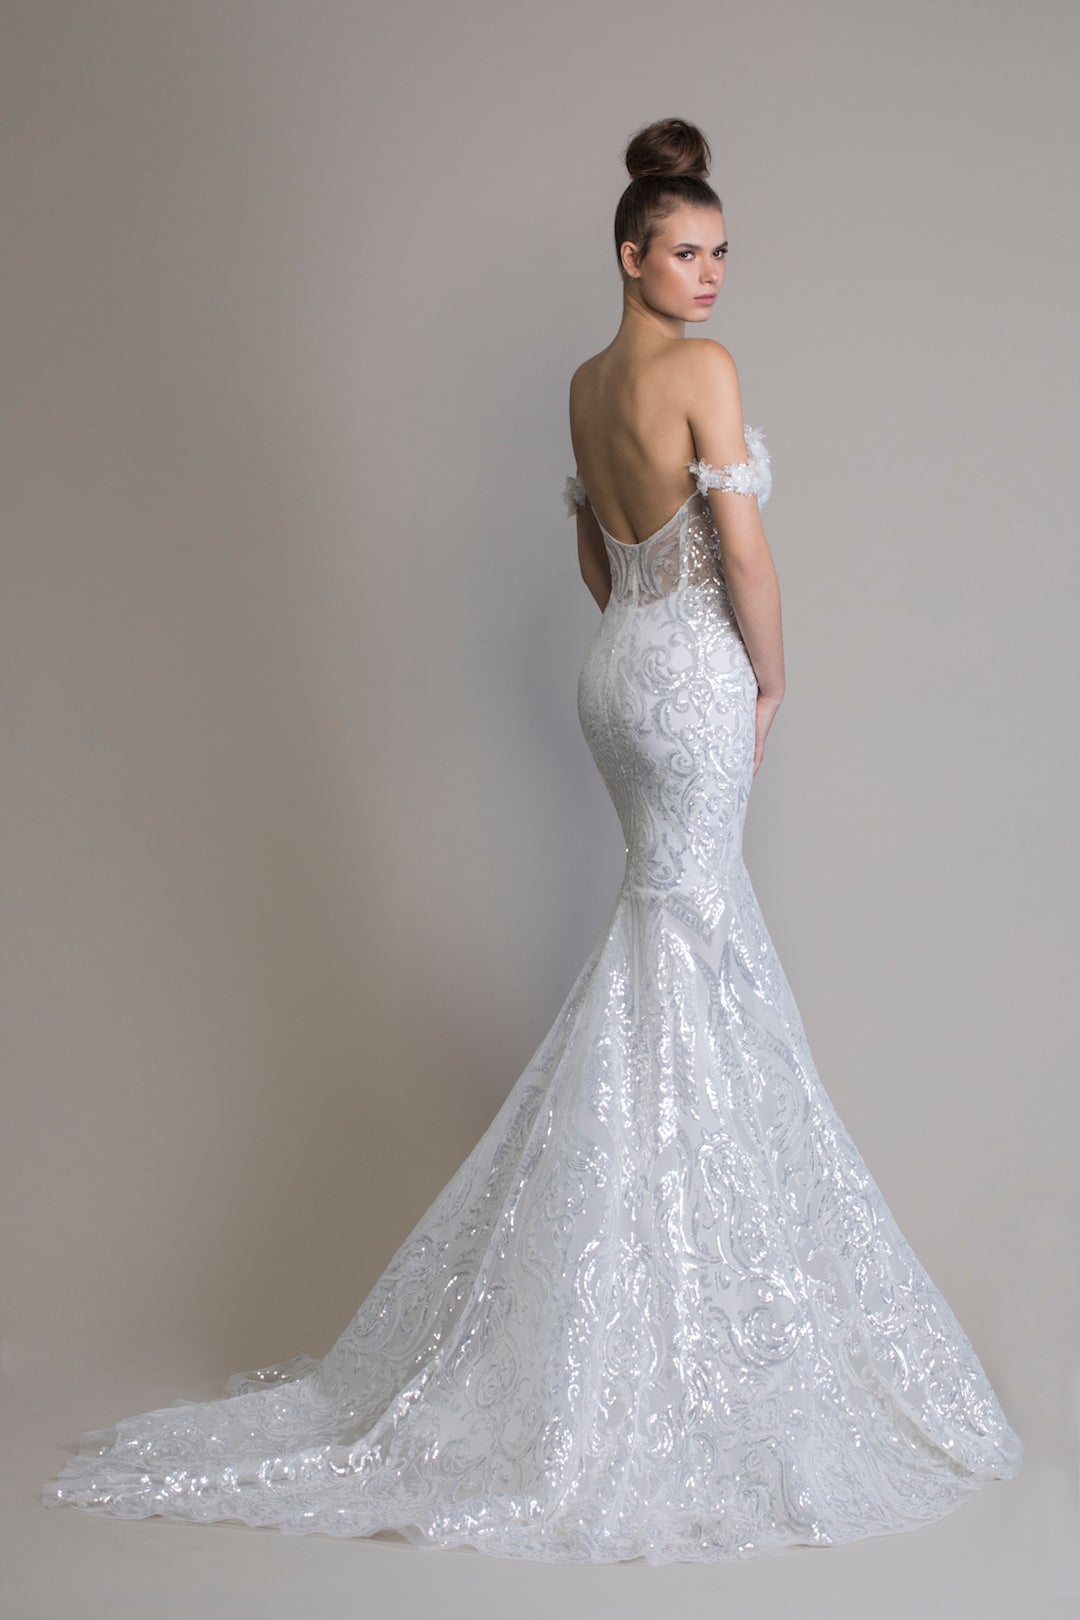 Pnina Tornai's new LOVE 2020 Collection is out! This is style 14753